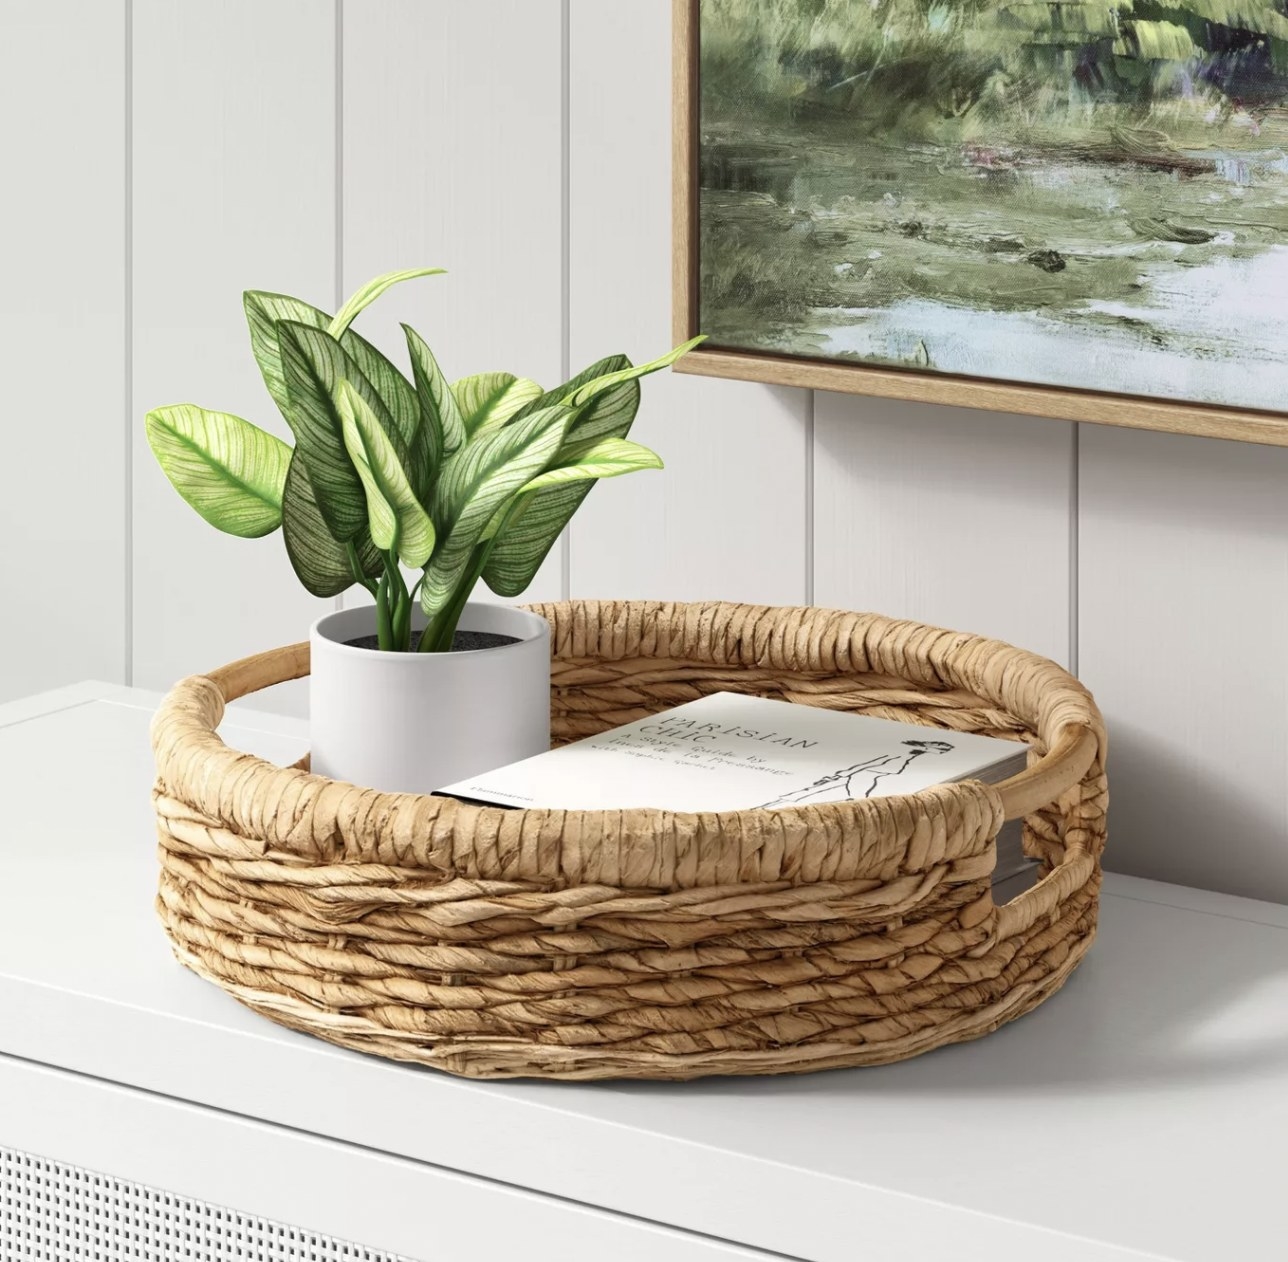 a wicker tray holding a book and a potted plant